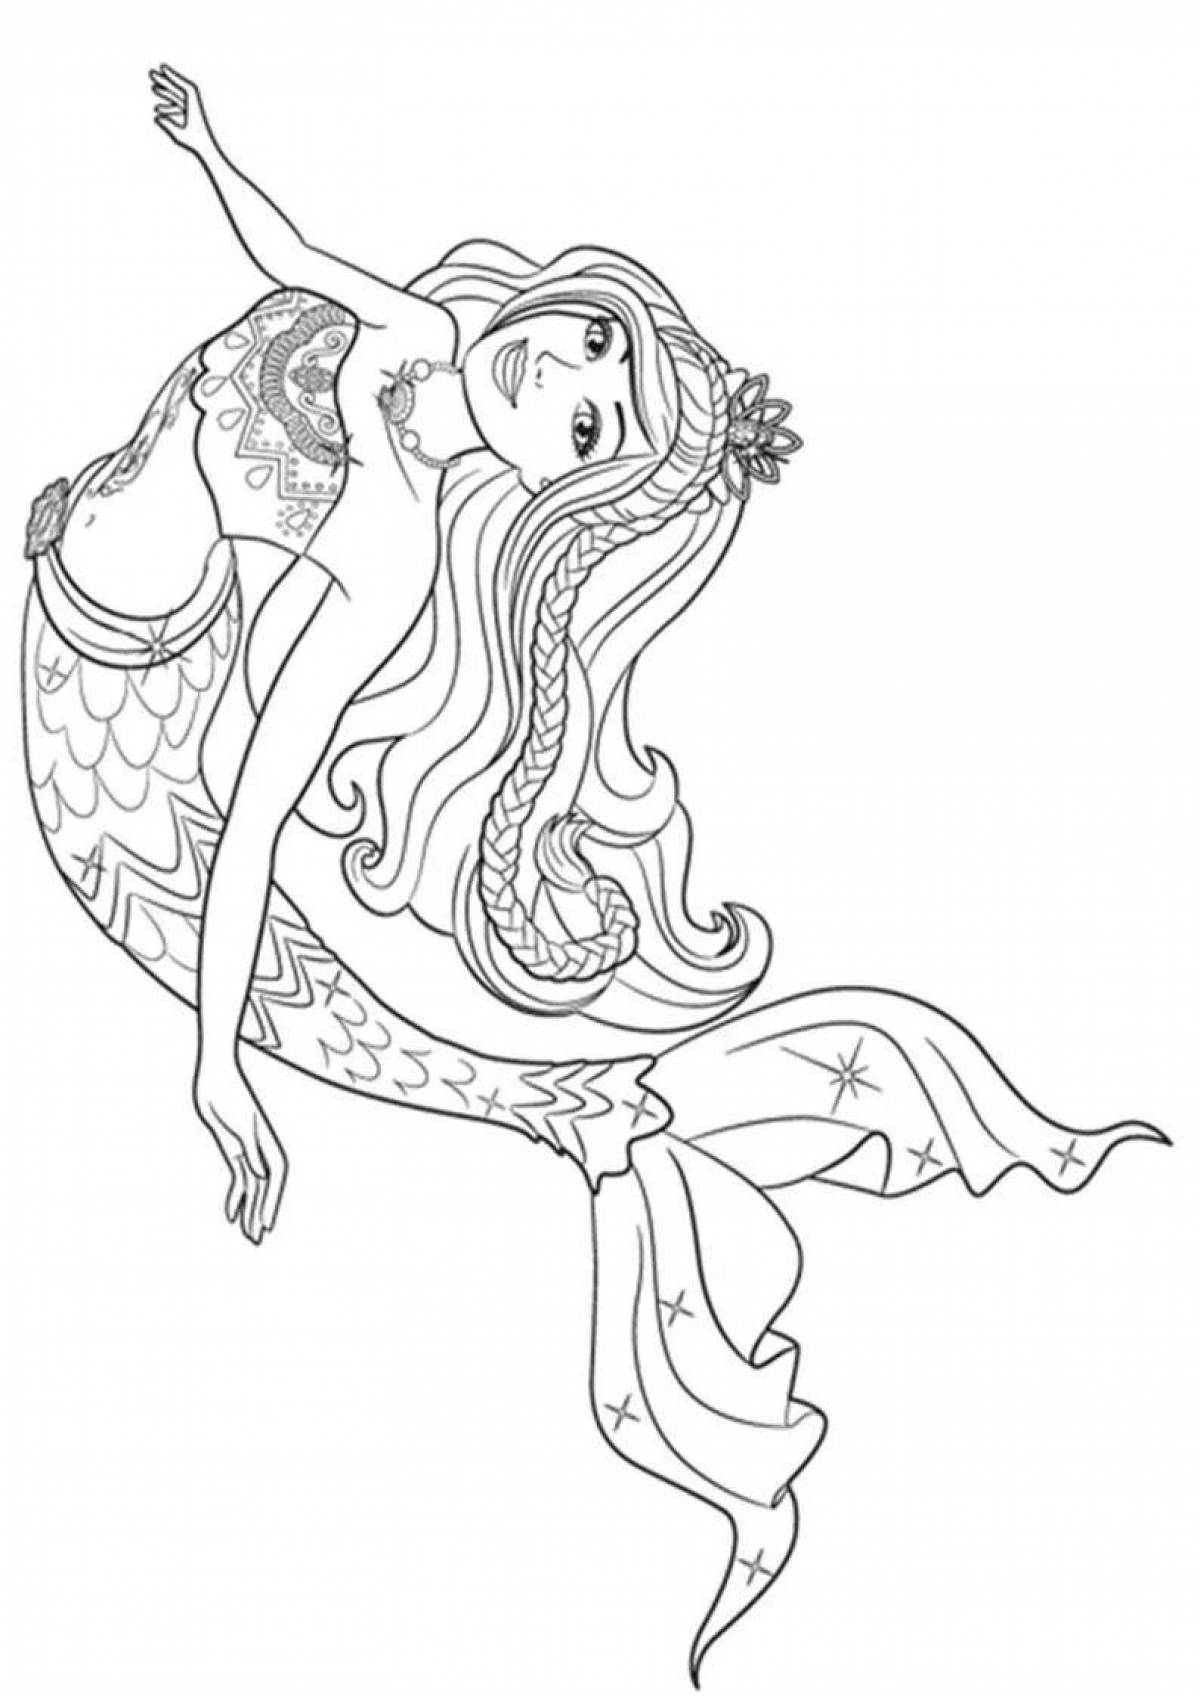 Barbie mermaid holiday coloring book for kids